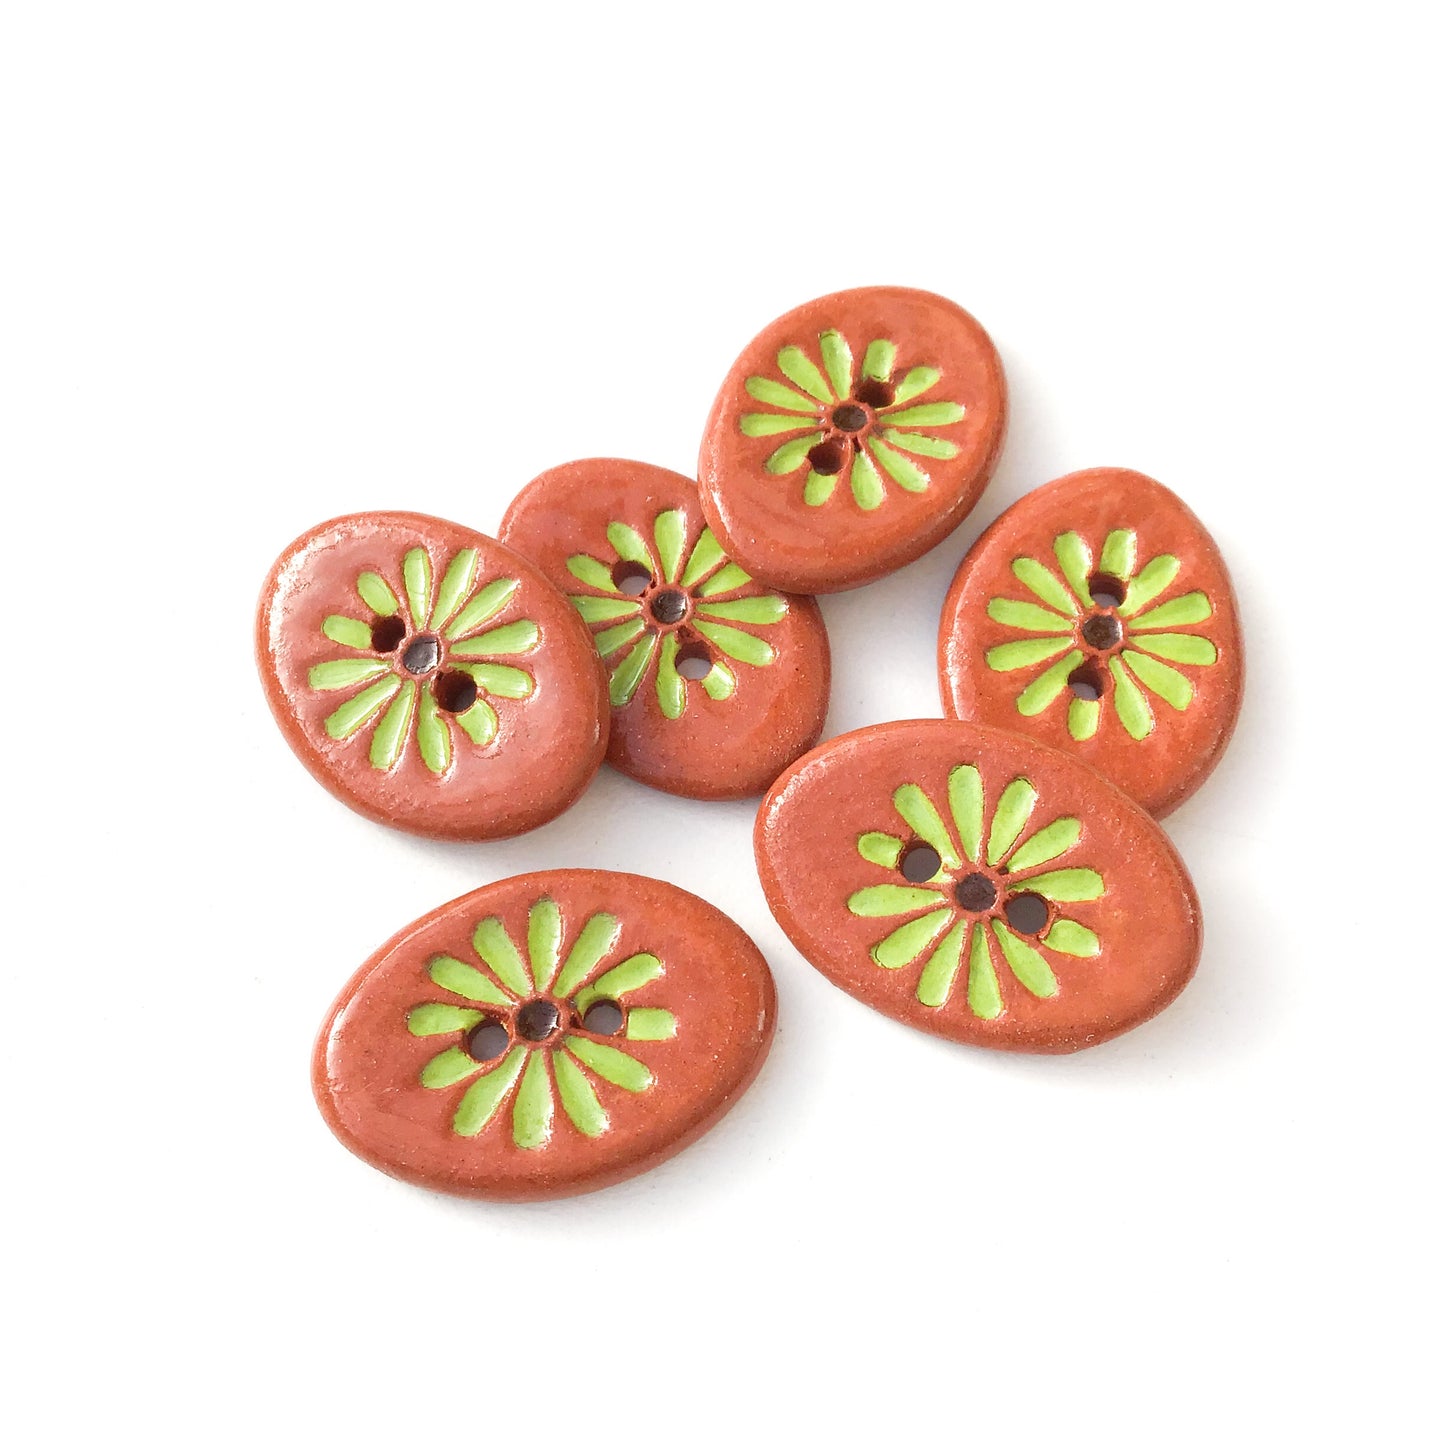 Green Daisy Button on Red Clay - Ceramic Flower Buttons - 5/8" x 7/8" - 7 Pack (ws-97)